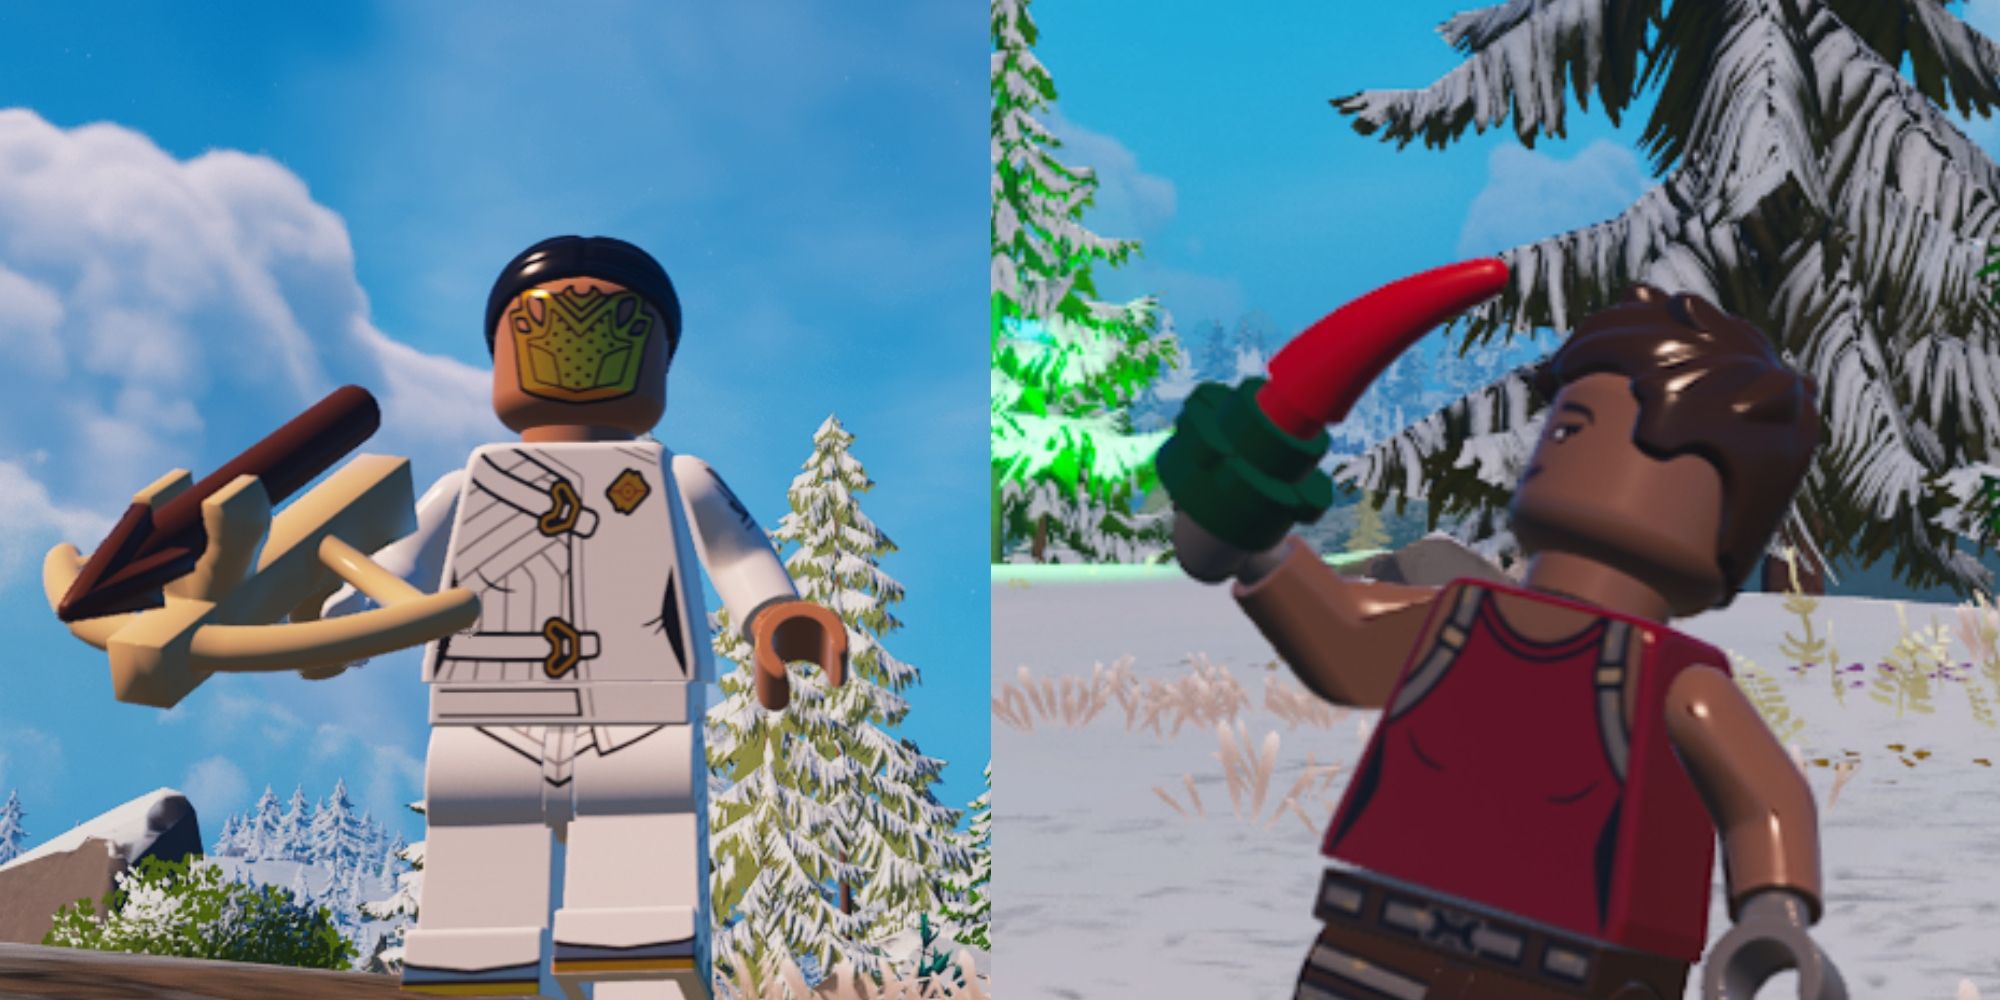 Lego Fortnite Player holding epic recurve crossbow and player eating spicy pepper